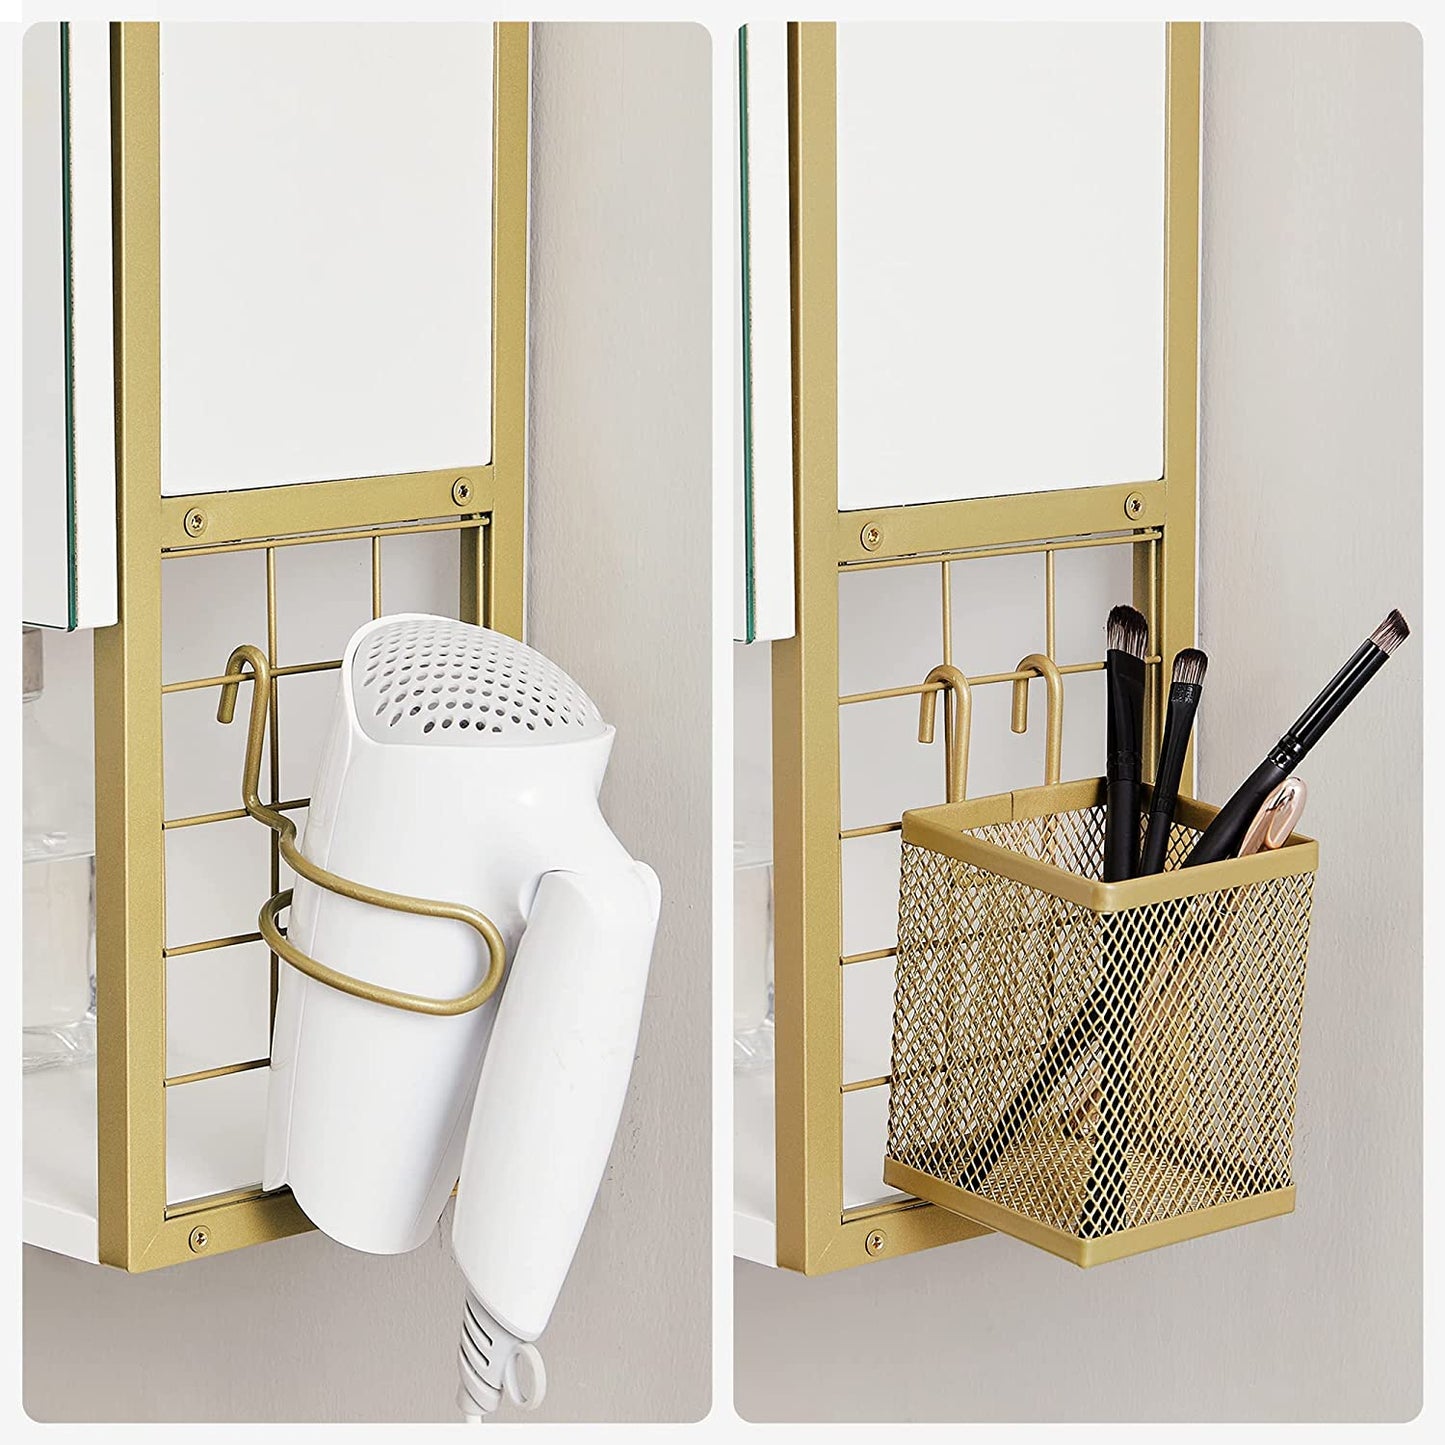 Bathroom Mirror Cabinet with Lighting Bathroom Wall Cabinet Modern White Gold BB-K124A10